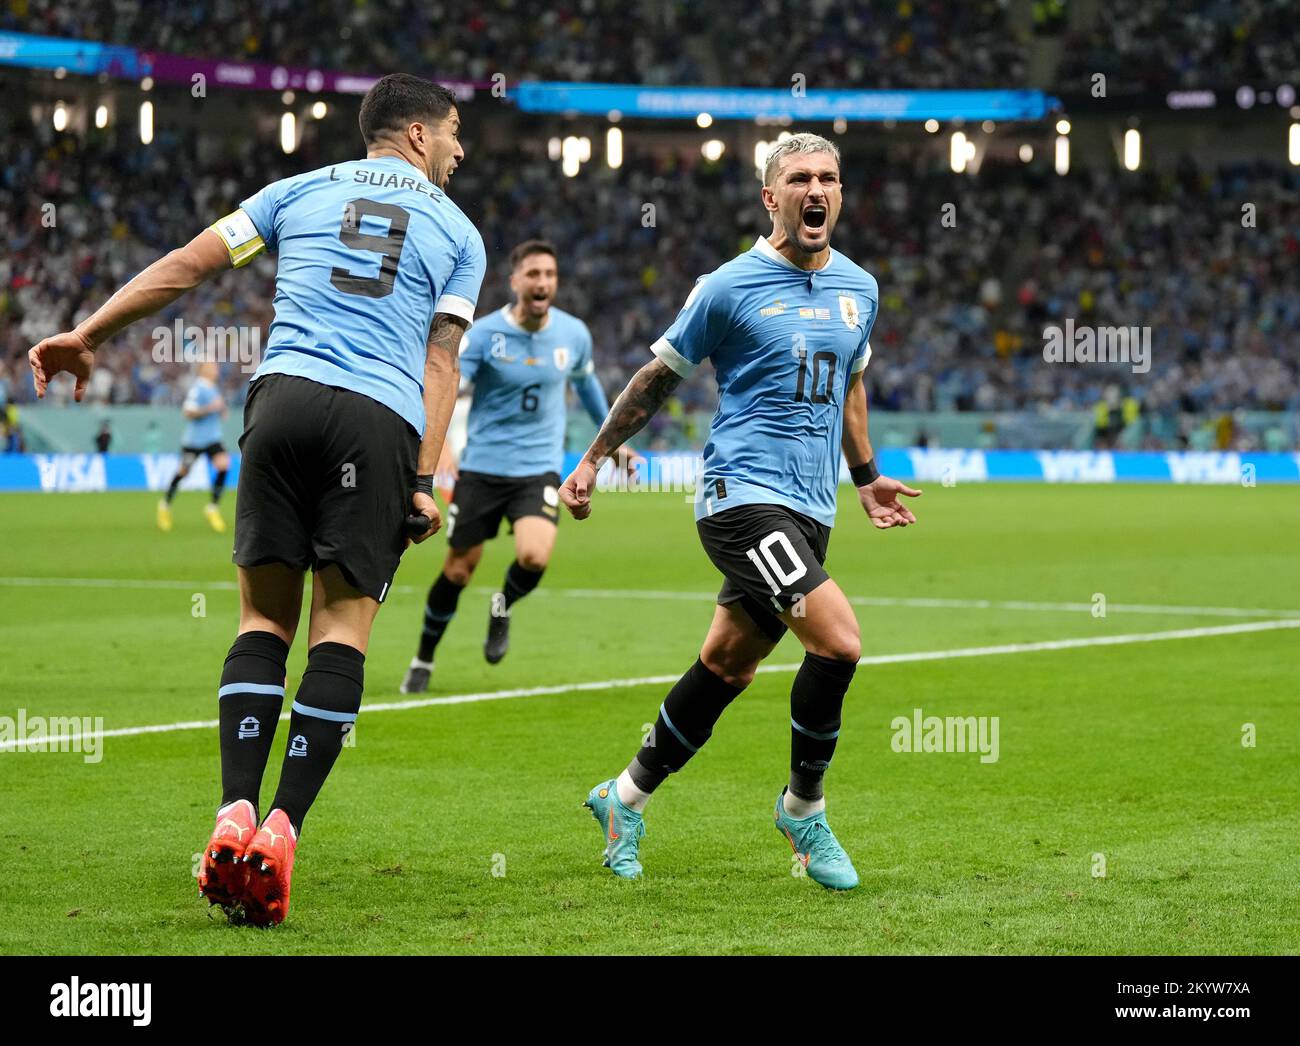 Uruguay's Giorgian de Arrascaeta (right) celebrates scoring their side's second goal of the game with teammate Luis Suarez during the FIFA World Cup Group H match at the Al Janoub Stadium in Al-Wakrah, Qatar. Picture date: Friday December 2, 2022. Stock Photo